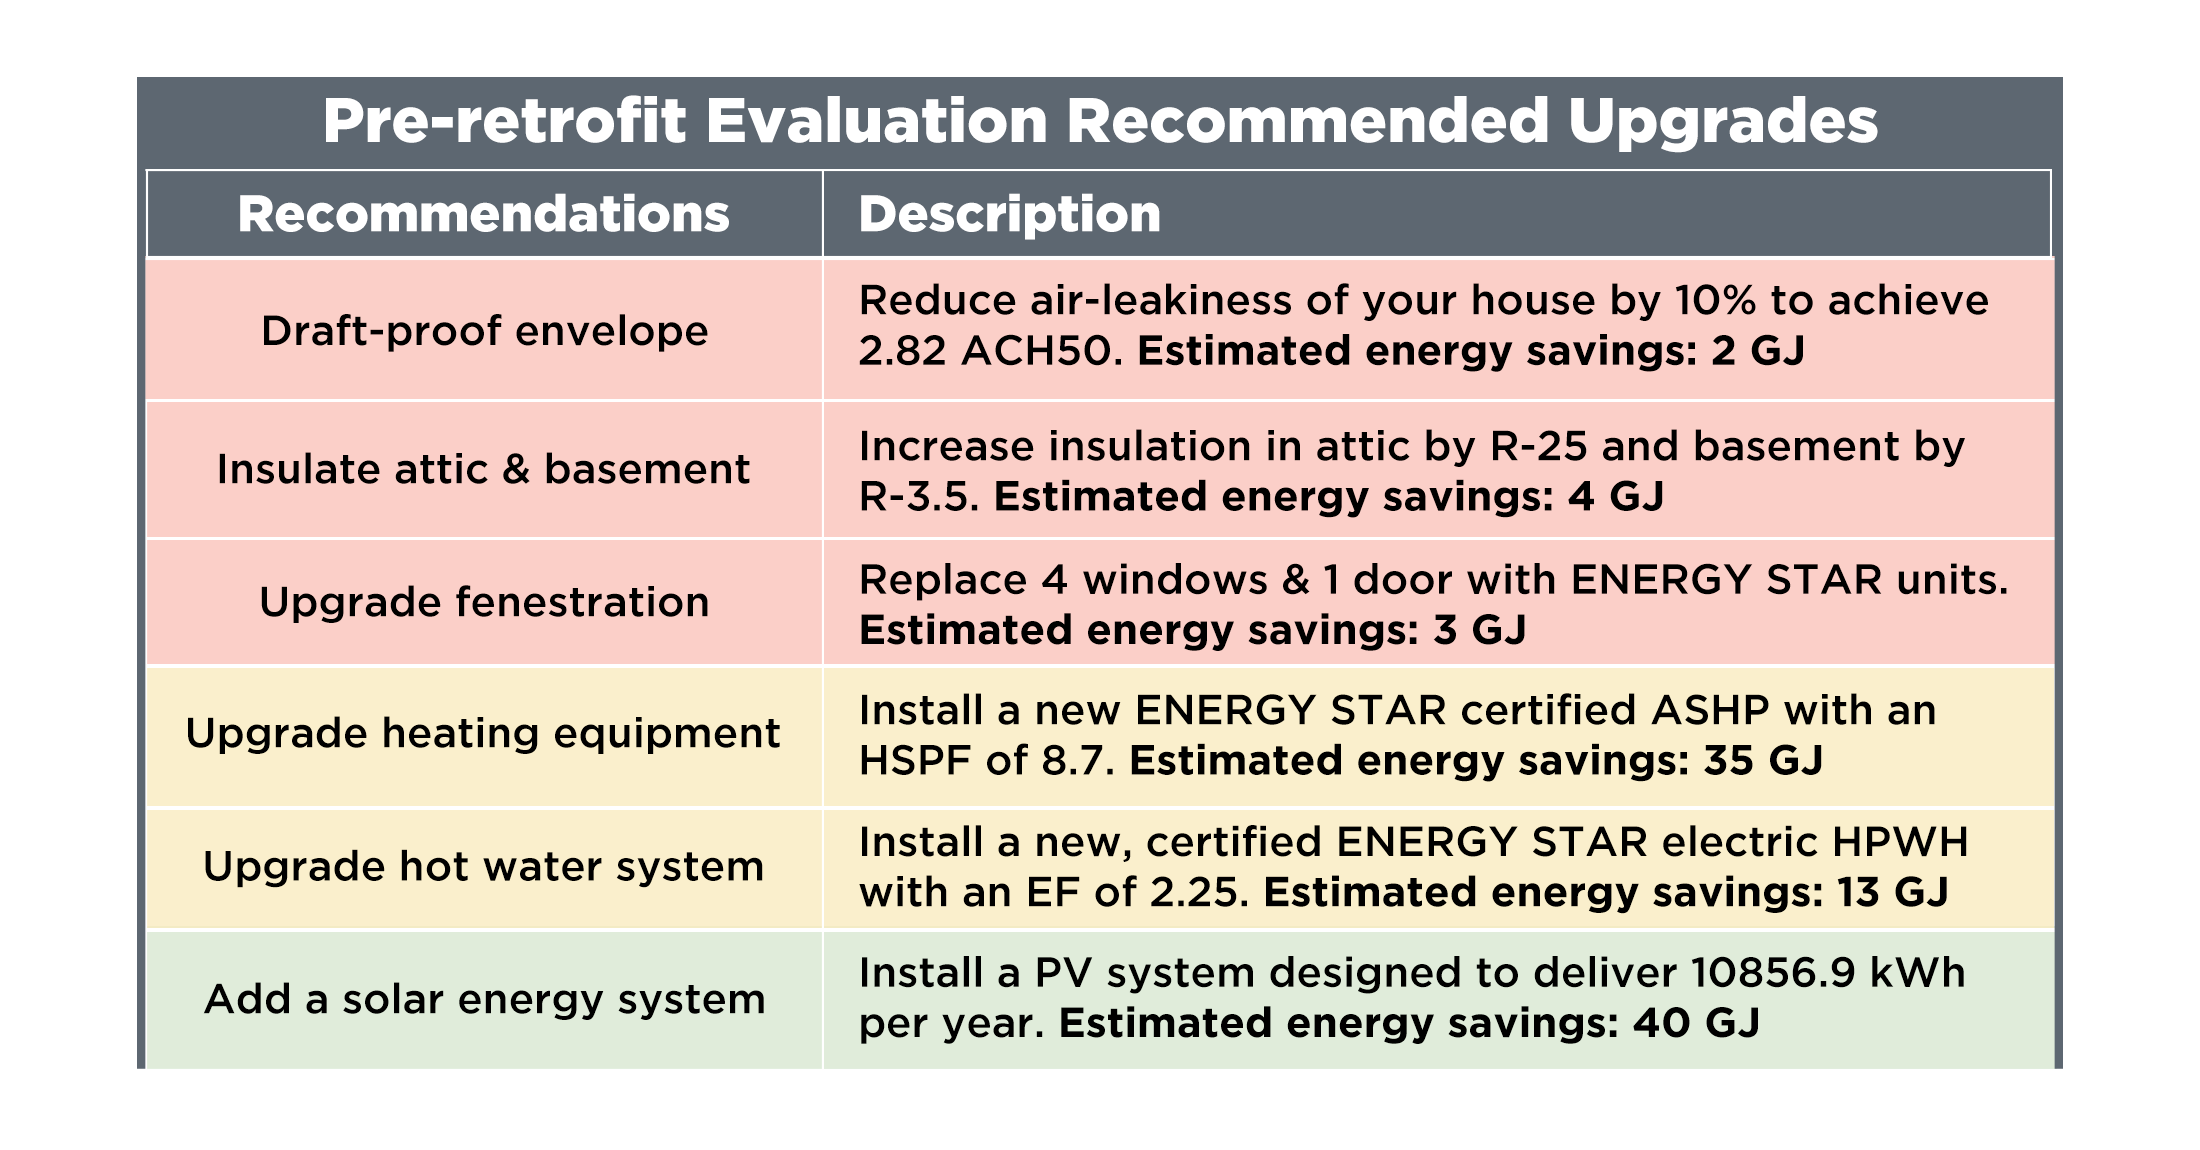 Recommended Upgrades Recommendation Description Perform draft-proofing Reduce air-leakiness of your house by 10% to achieve 2.82 air changes/hour at 50Pa. Estimated energy savings: 2 GJ Upgrade windows Replace 4 windows with ENERGY STAR certified models. Estimated energy savings: